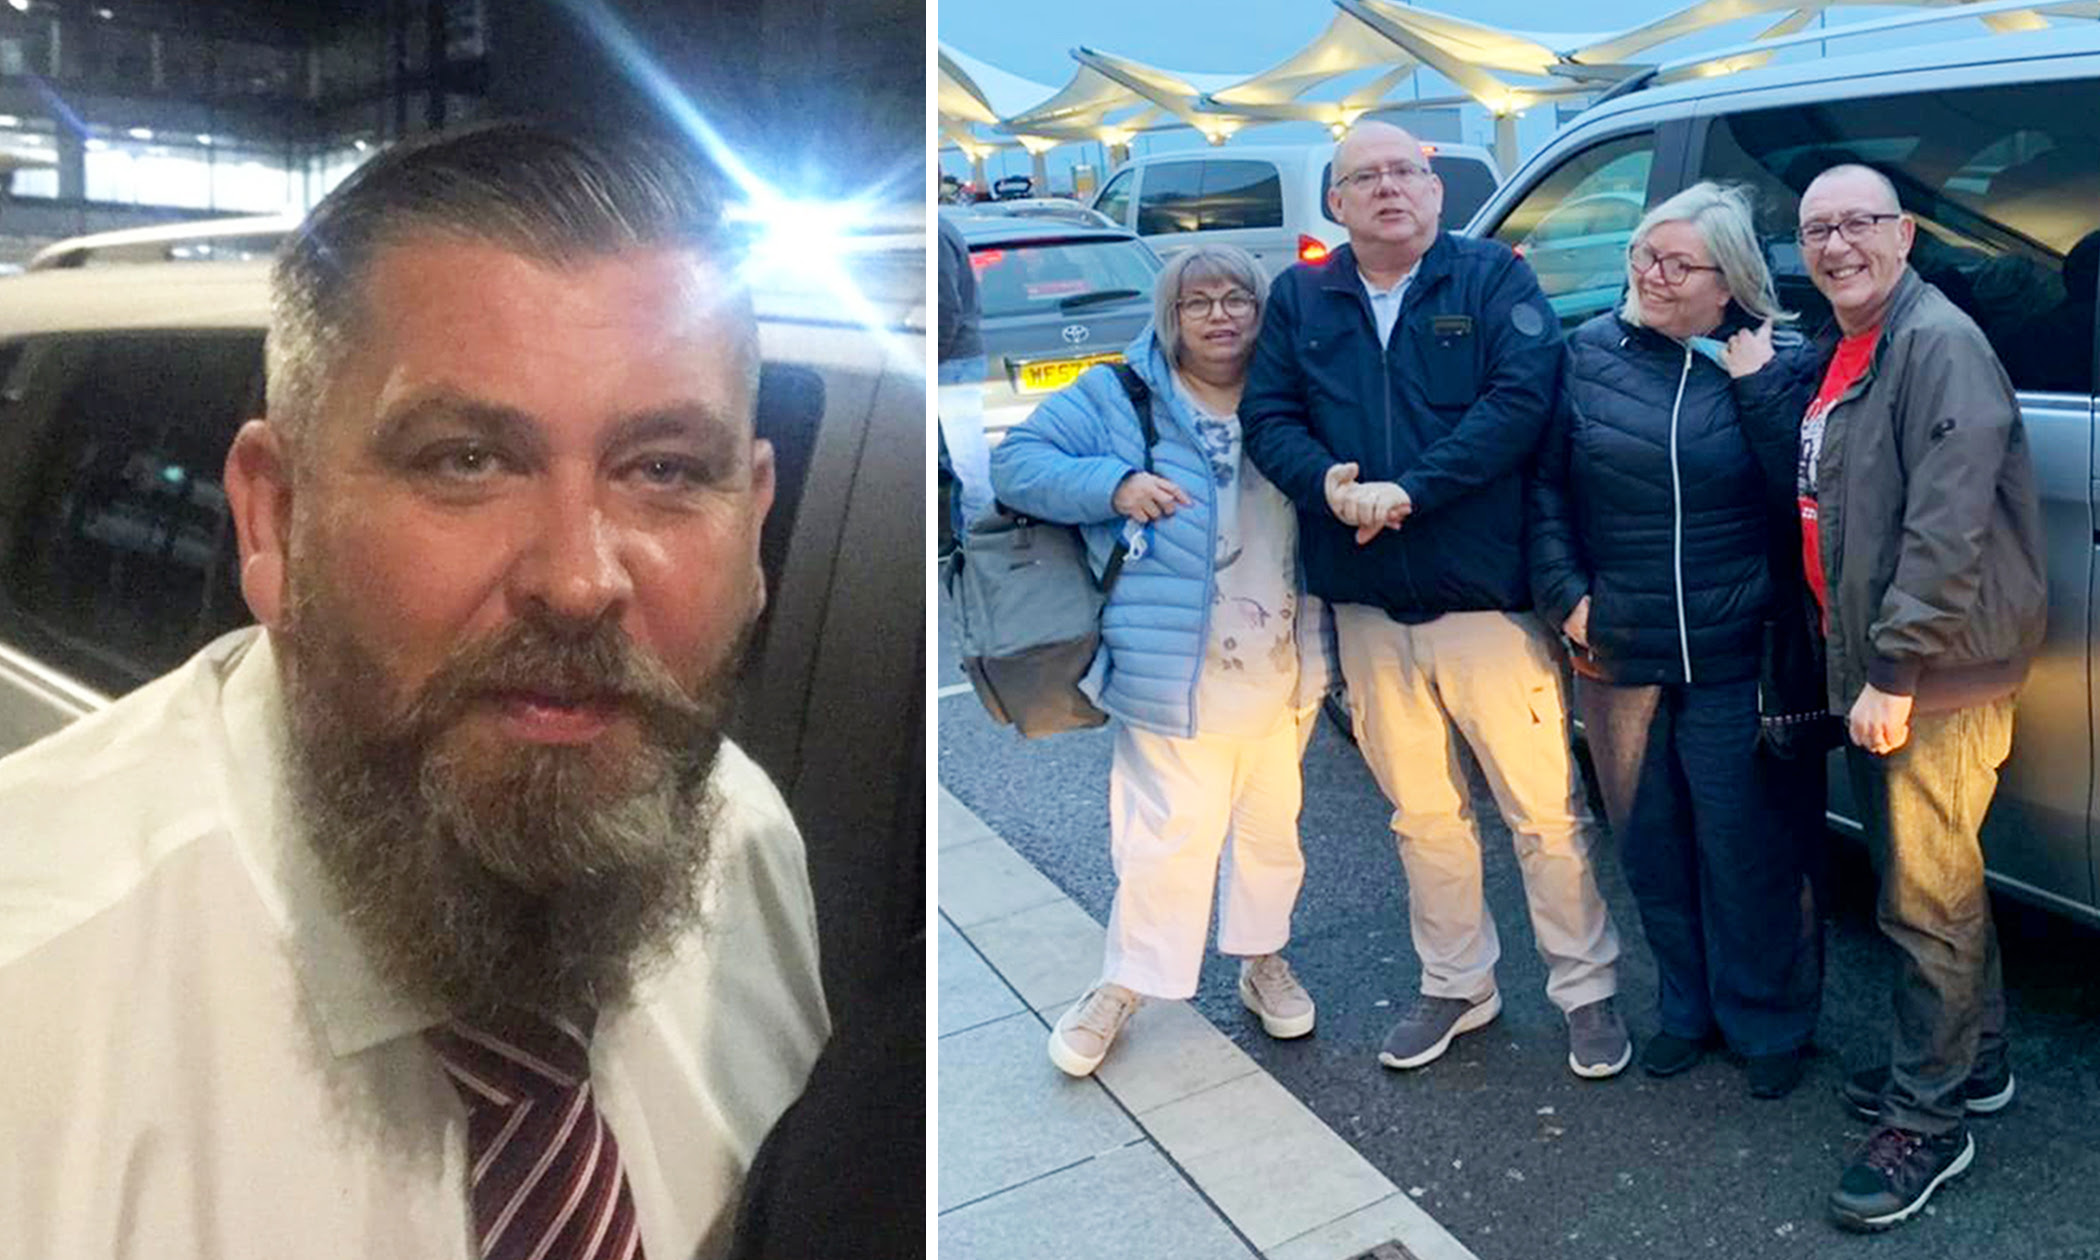 Taxi Driver Gave Customers Free 400-Mile Ride When Their Flight Got Canceled Due to Bad Weather